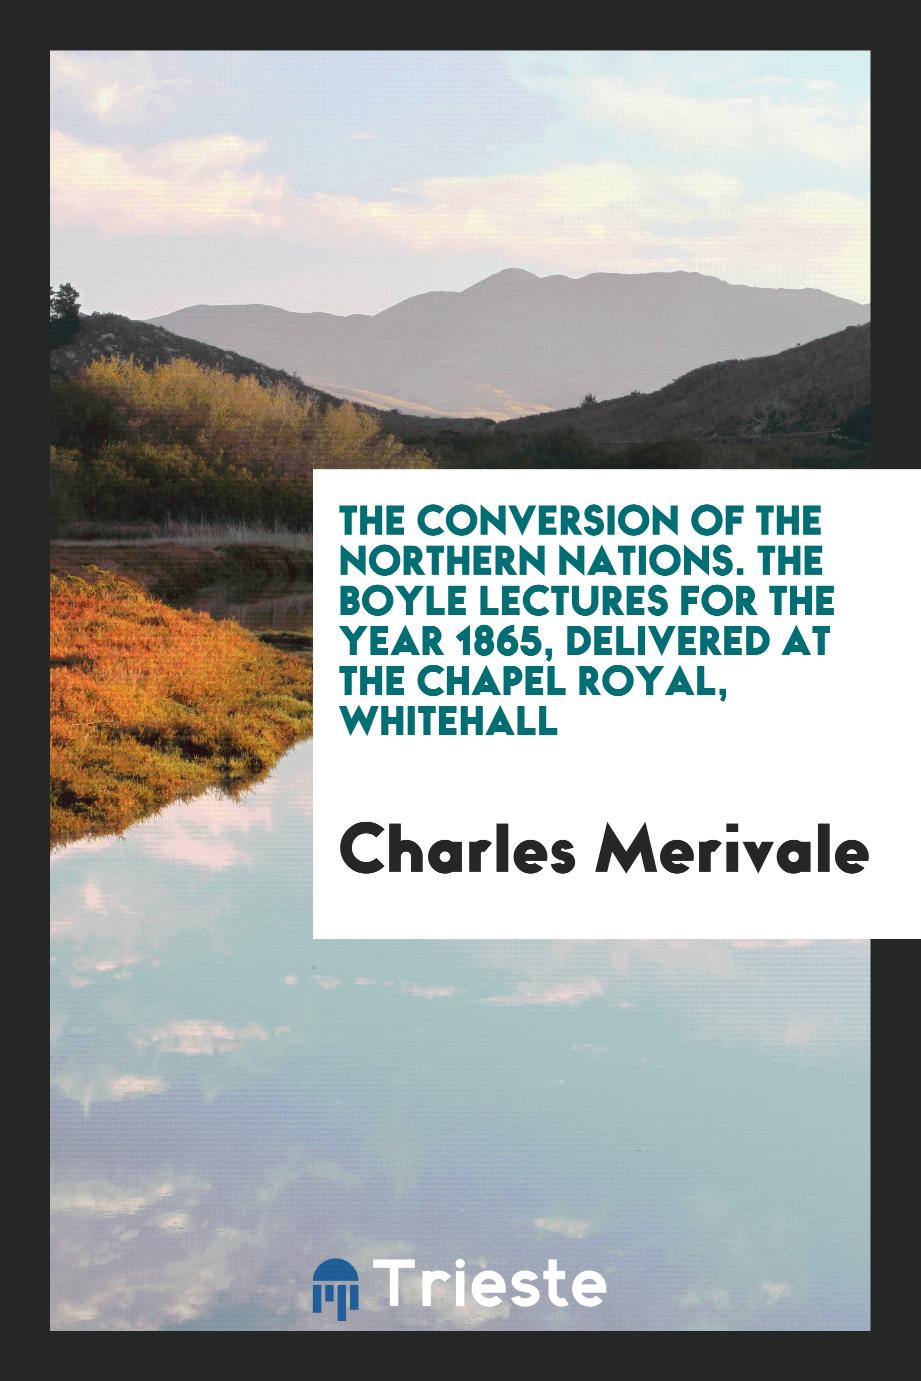 The conversion of the northern nations. The Boyle lectures for the year 1865, delivered at the Chapel Royal, Whitehall